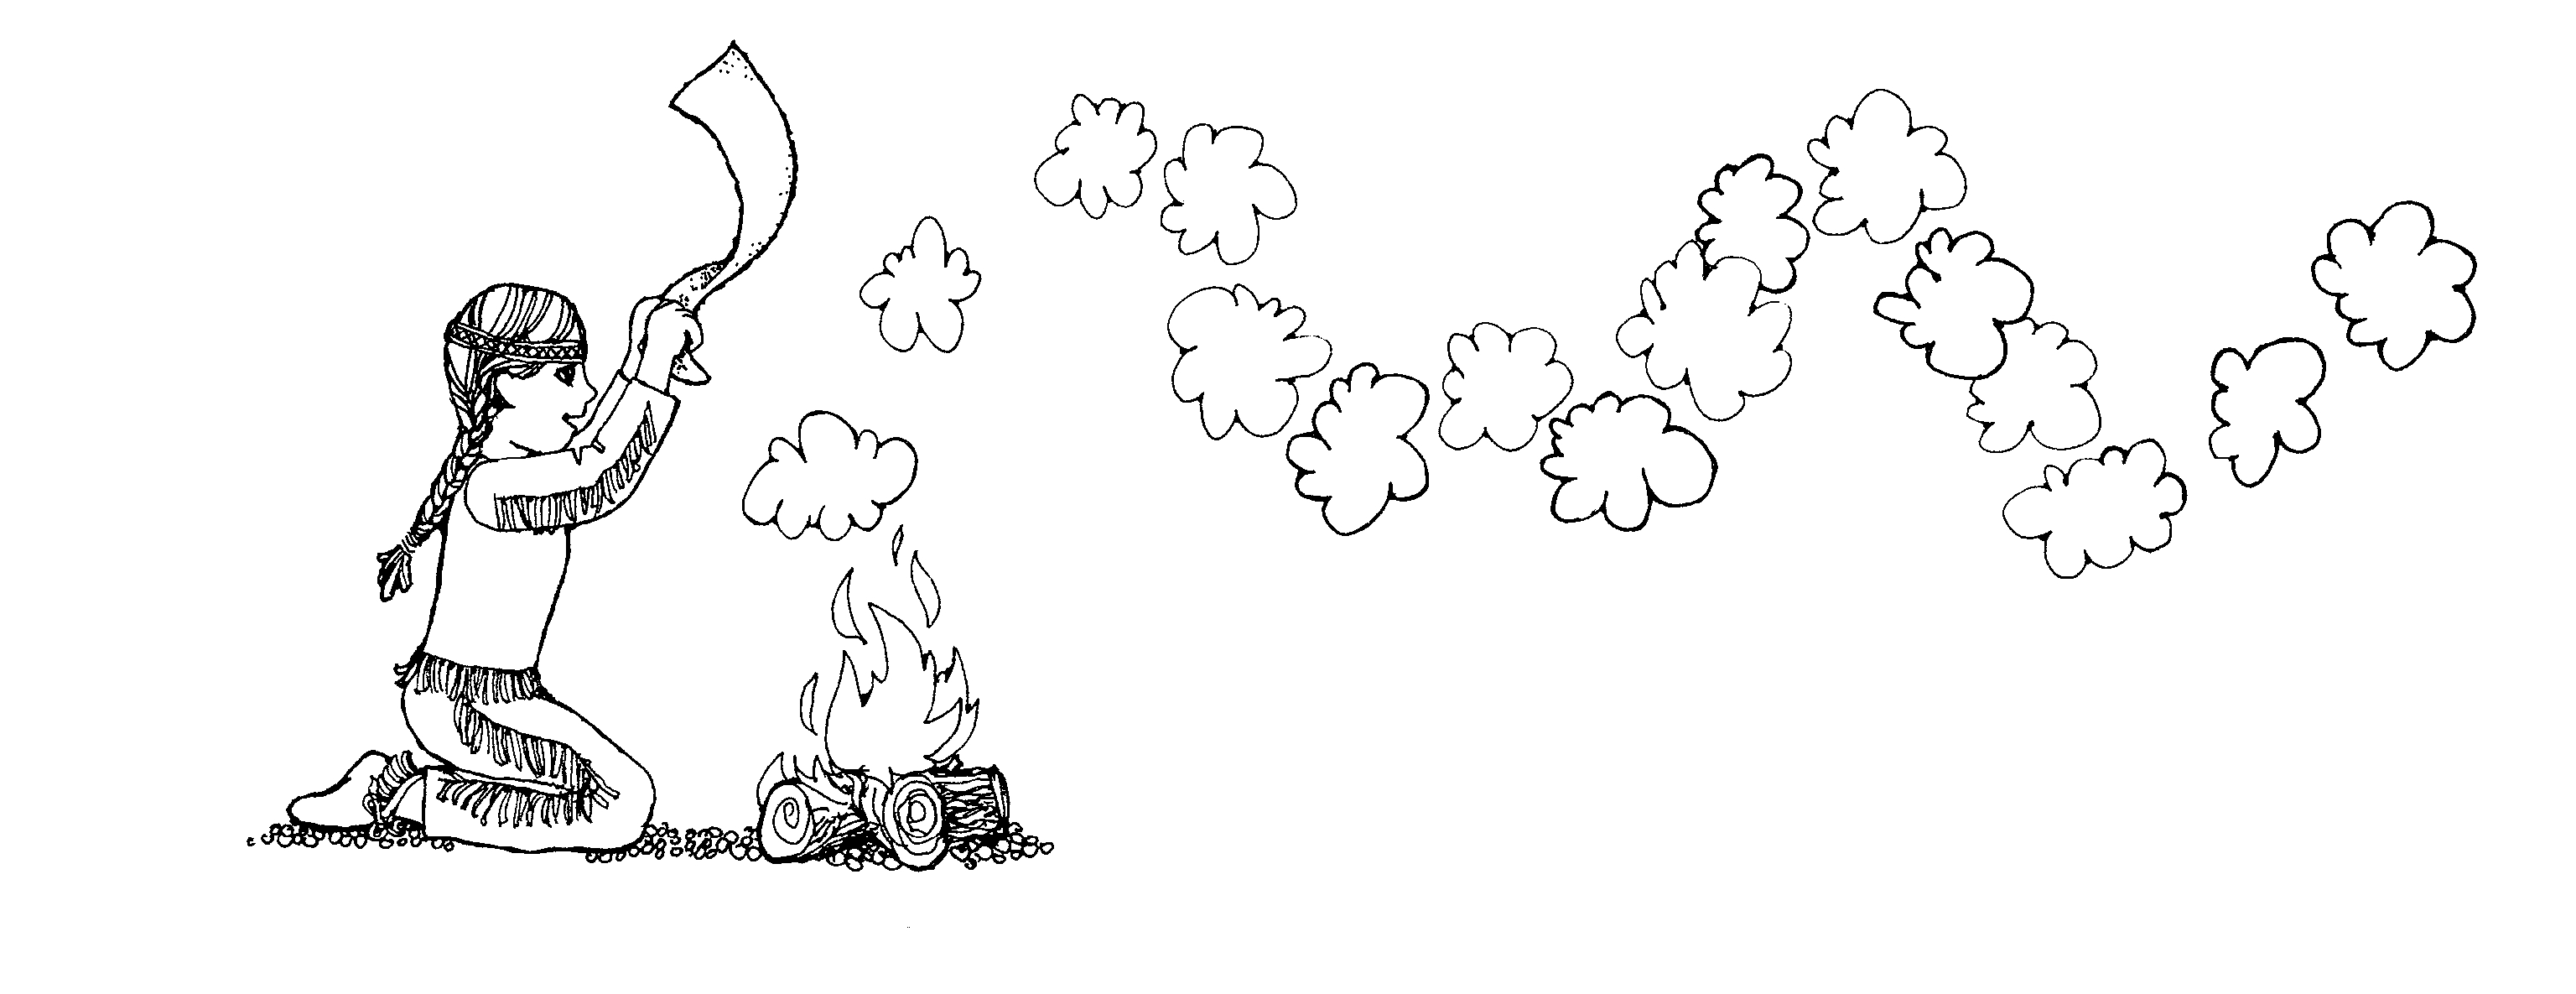 Smoke clipart black and white - Pencil and in color smoke clipart ...